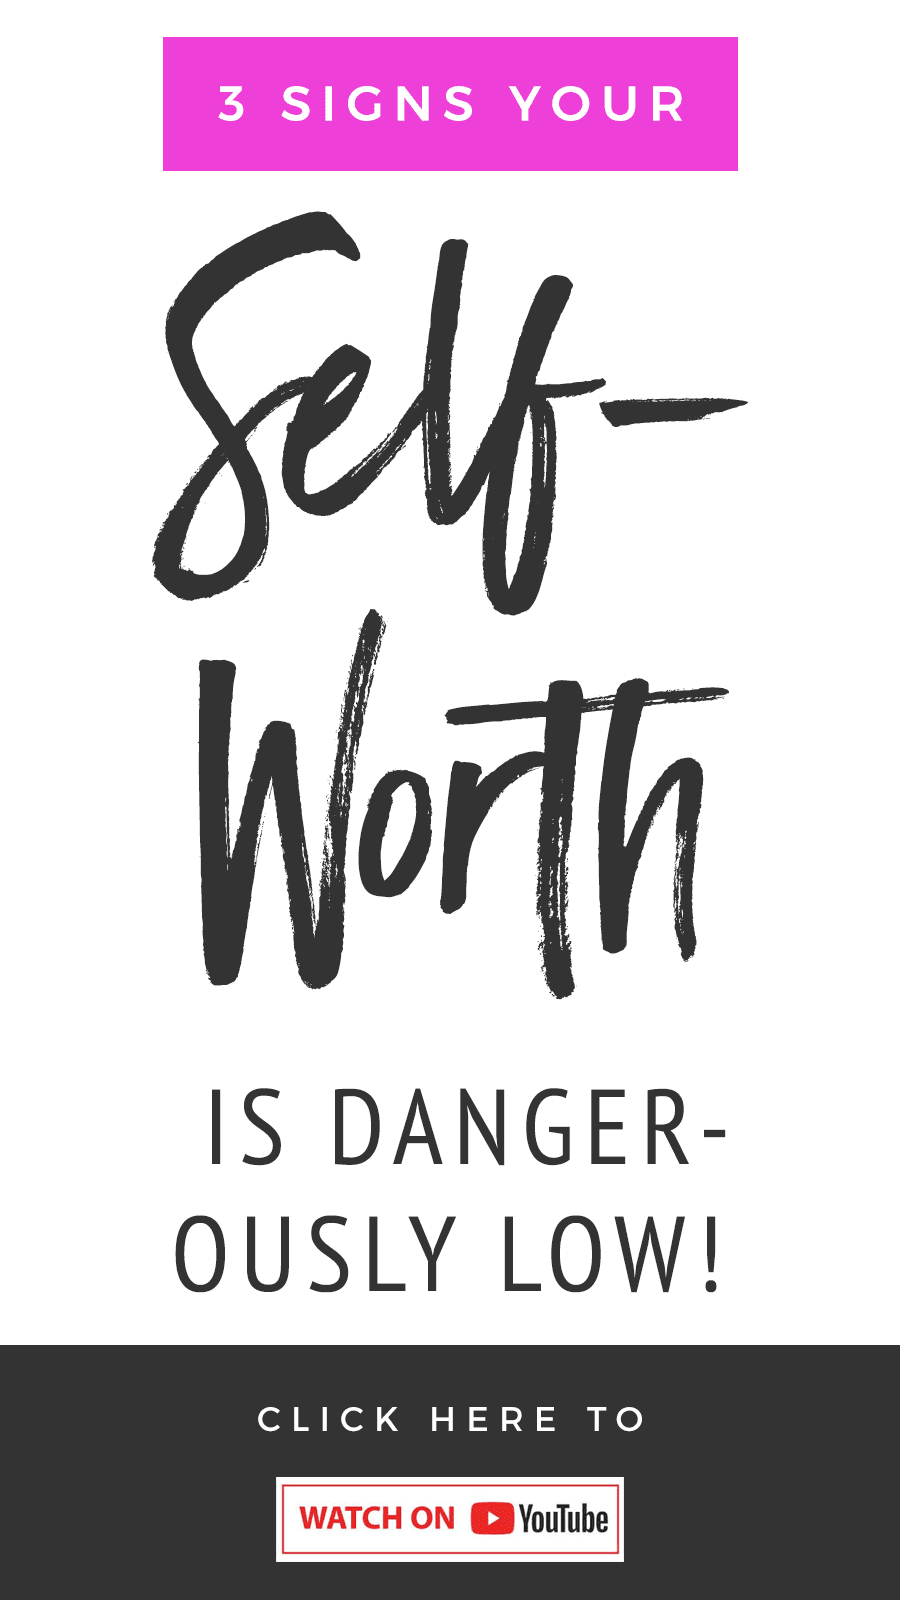 3 Signs Your Self-Worth Is Dangerously Low